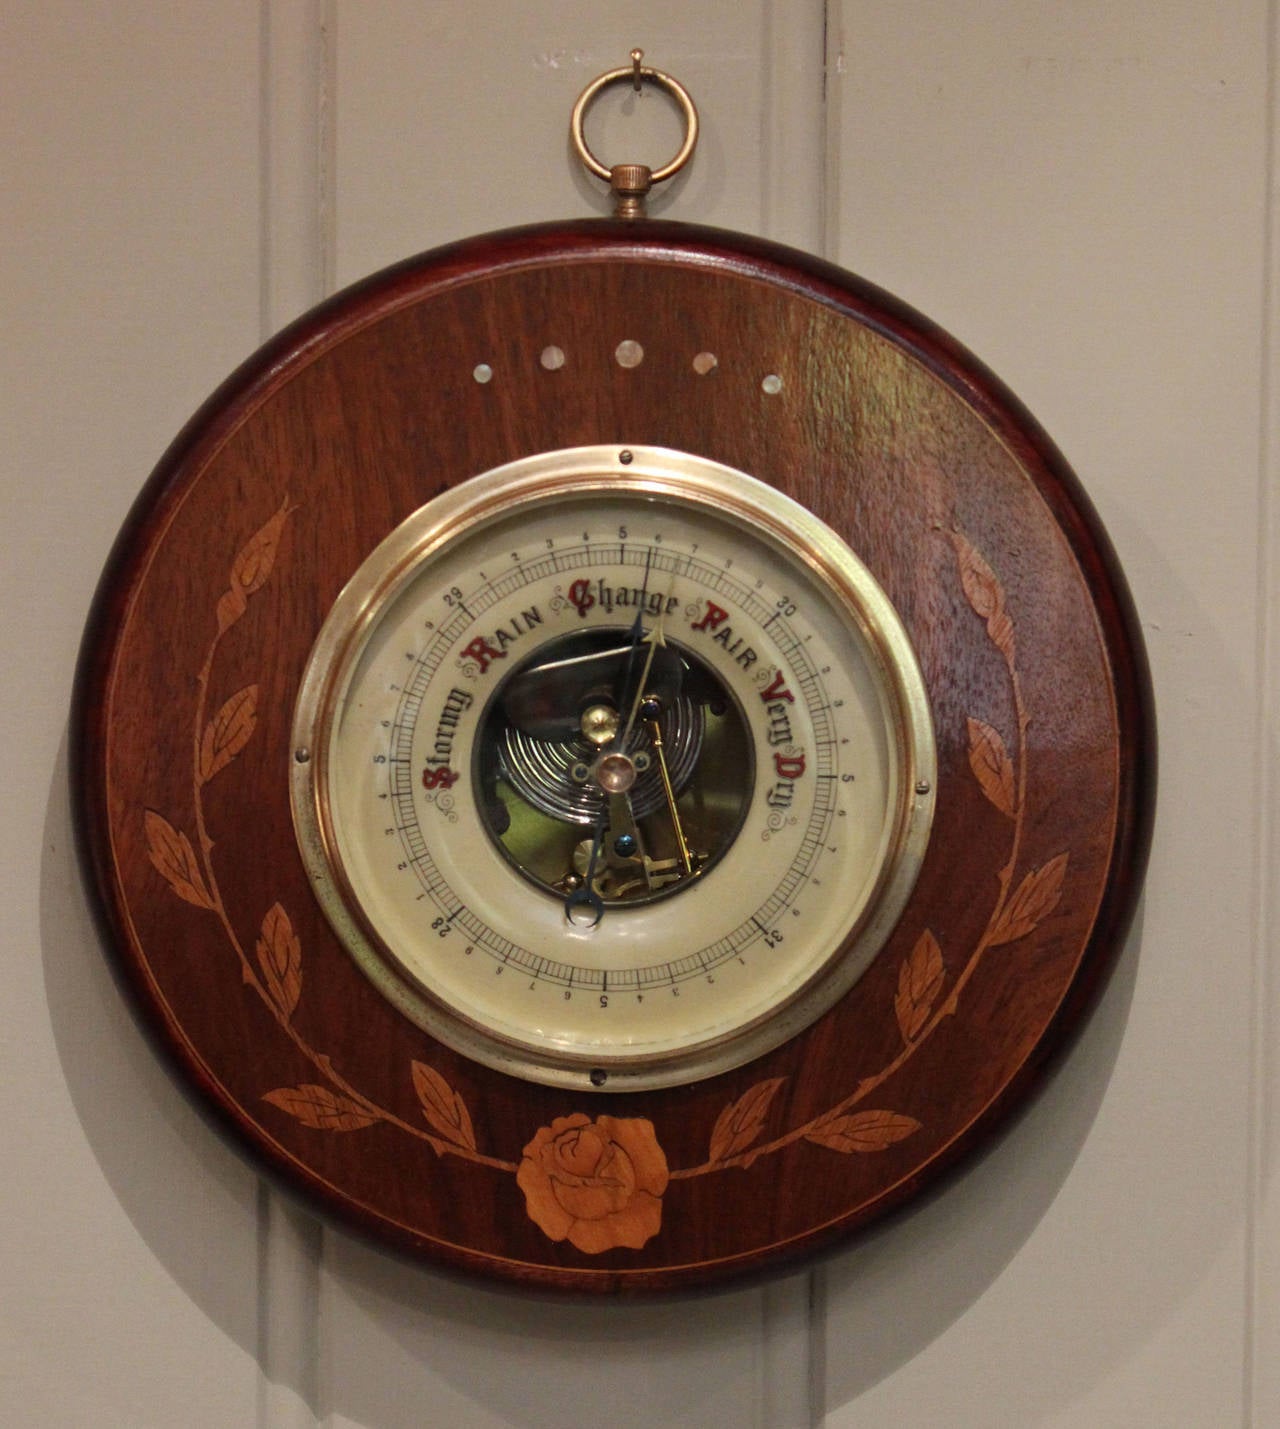 A small circular barometer, having a beechwood and walnut case, inlaid with floral satinwood decoration. It has a visible aneroid movement and a bevel edge glass.

Diameter	15.00cm